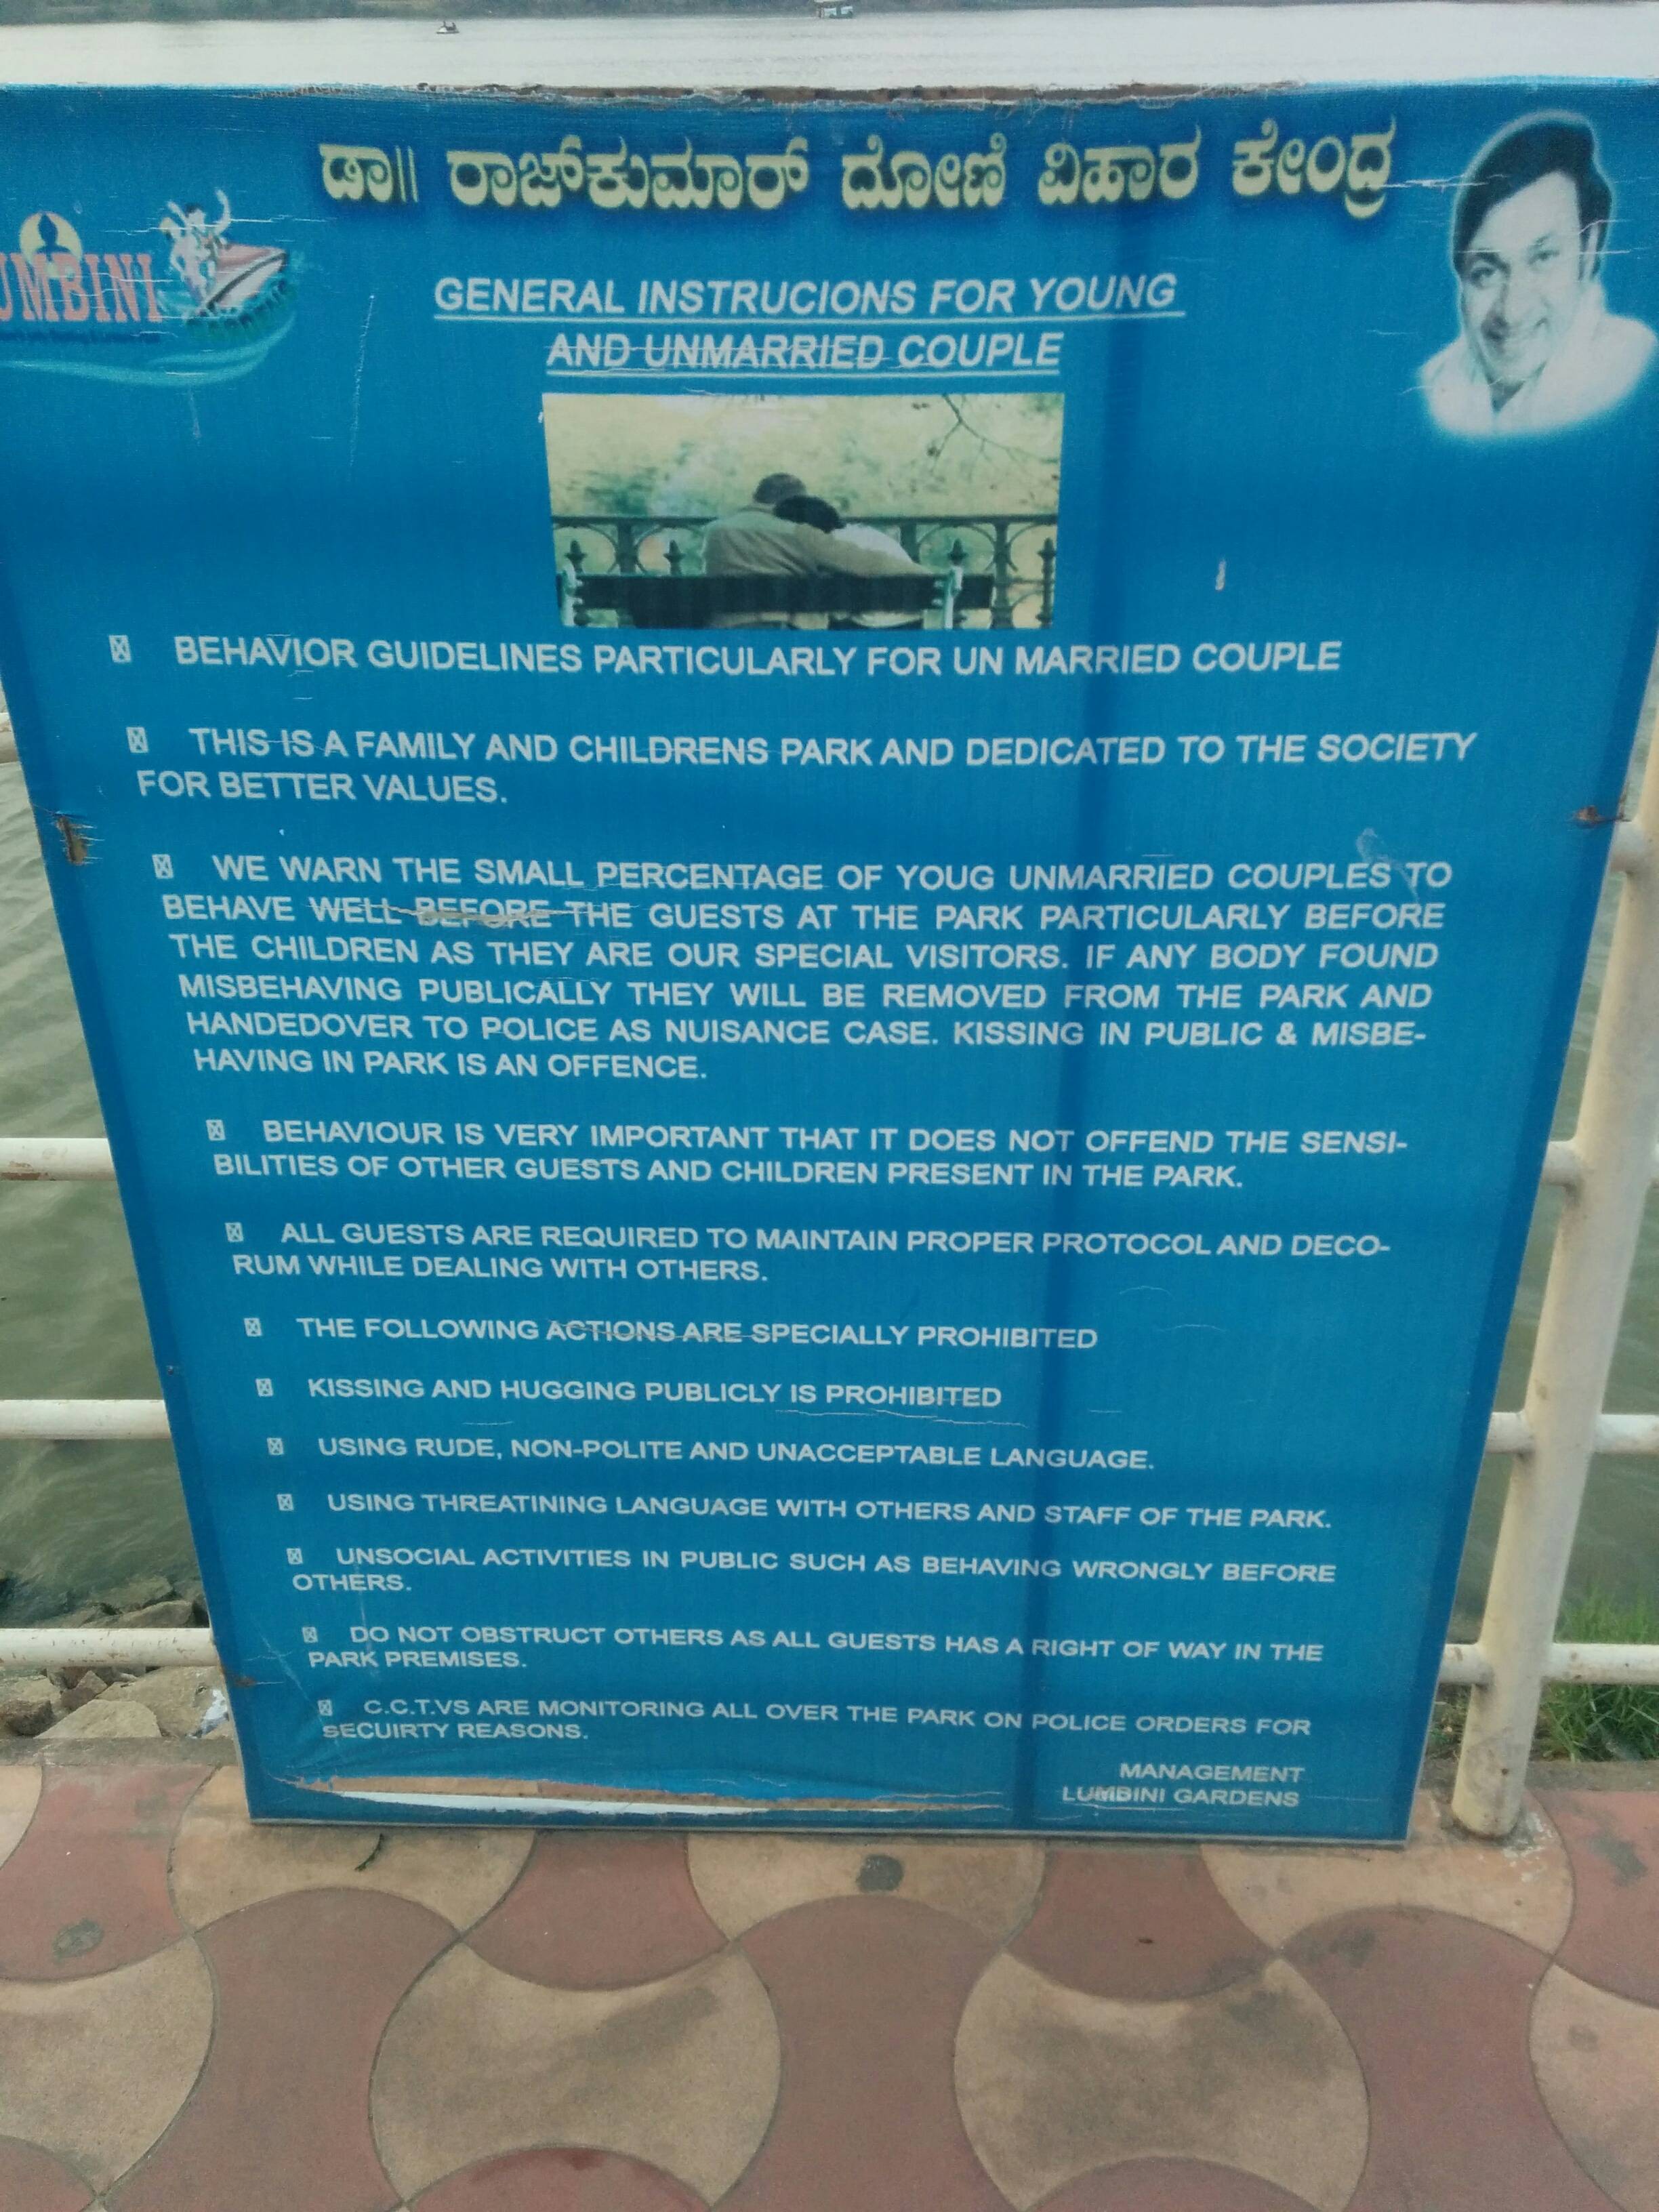 In Bengaluru this Park Has A Signboard With â€˜Behaviour Guidelinesâ€™ For â€˜Young & Unmarriedâ€™ Couples